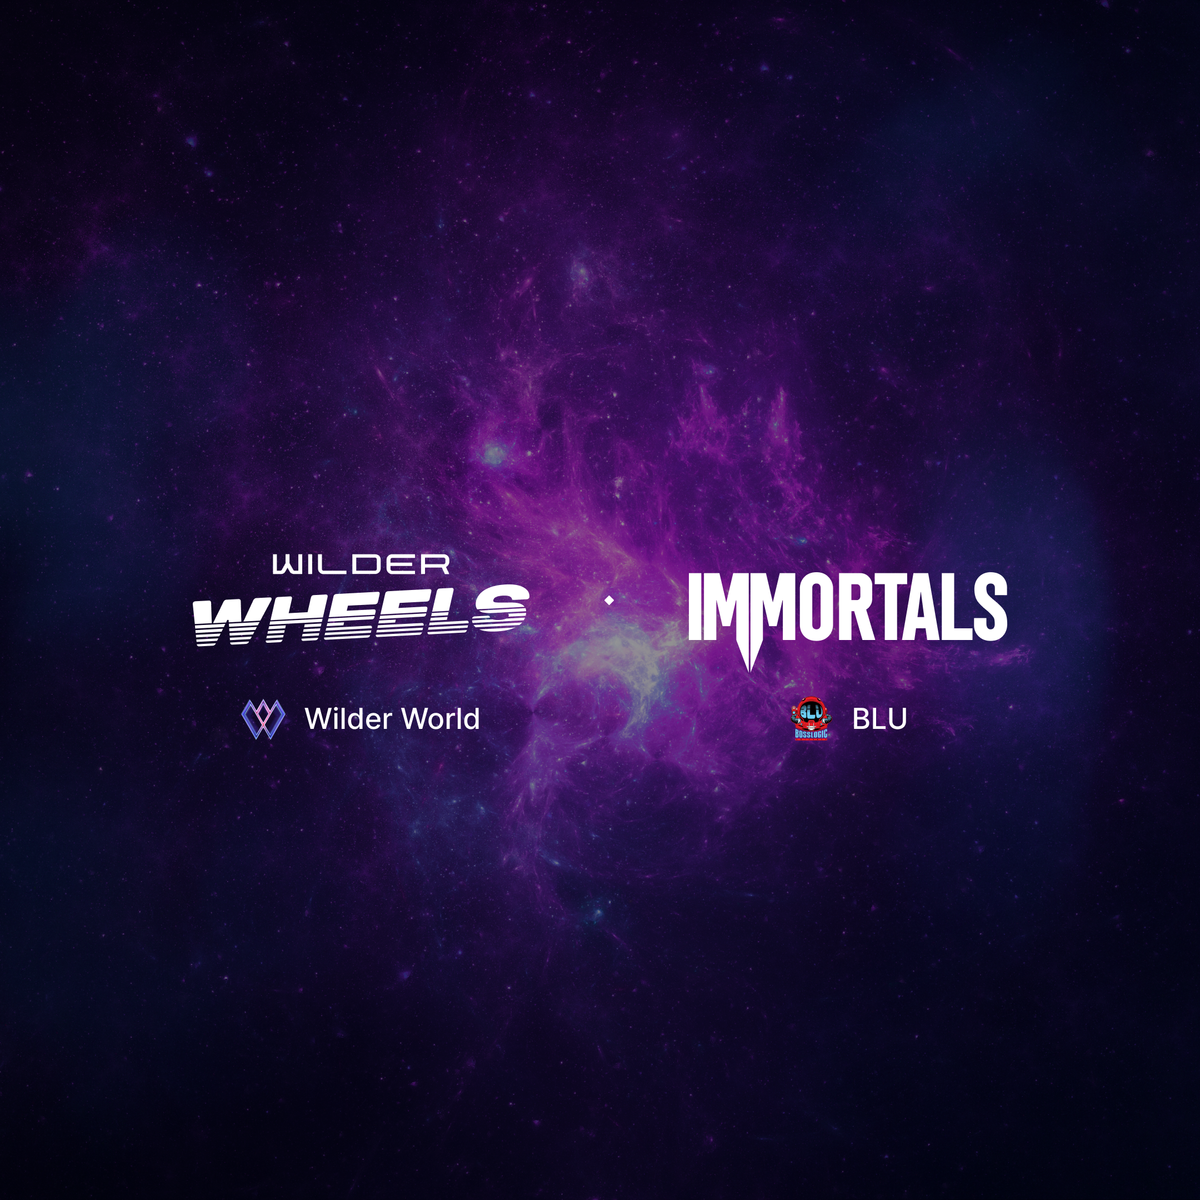 BossLogic’s “The BLU” joins forces with Wilder World for Immortals Early Access Pre-sale for the Wilder Nation